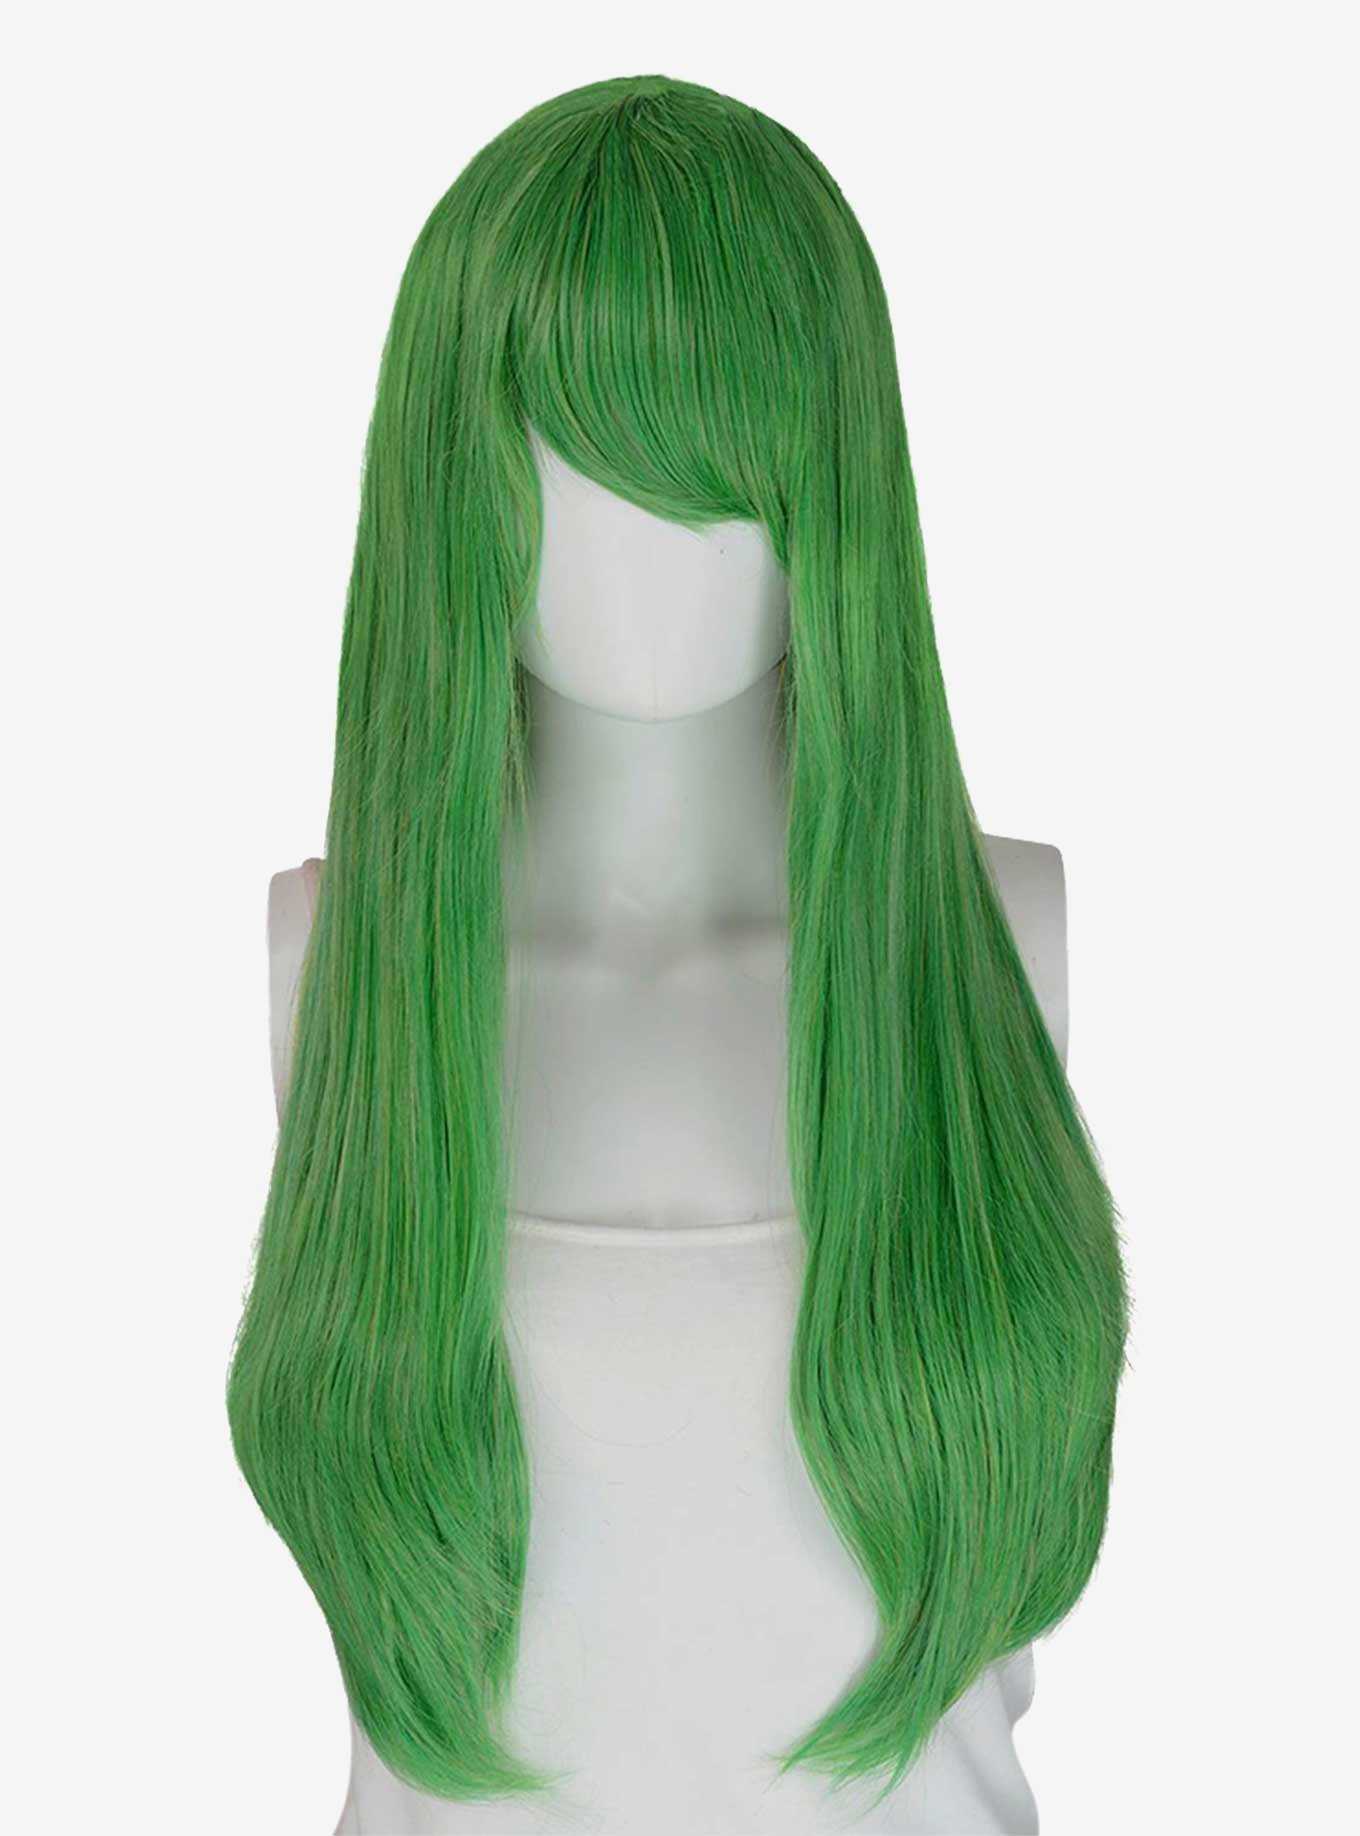 Epic Cosplay Nyx Clover Green Long Straight Wig, , hi-res